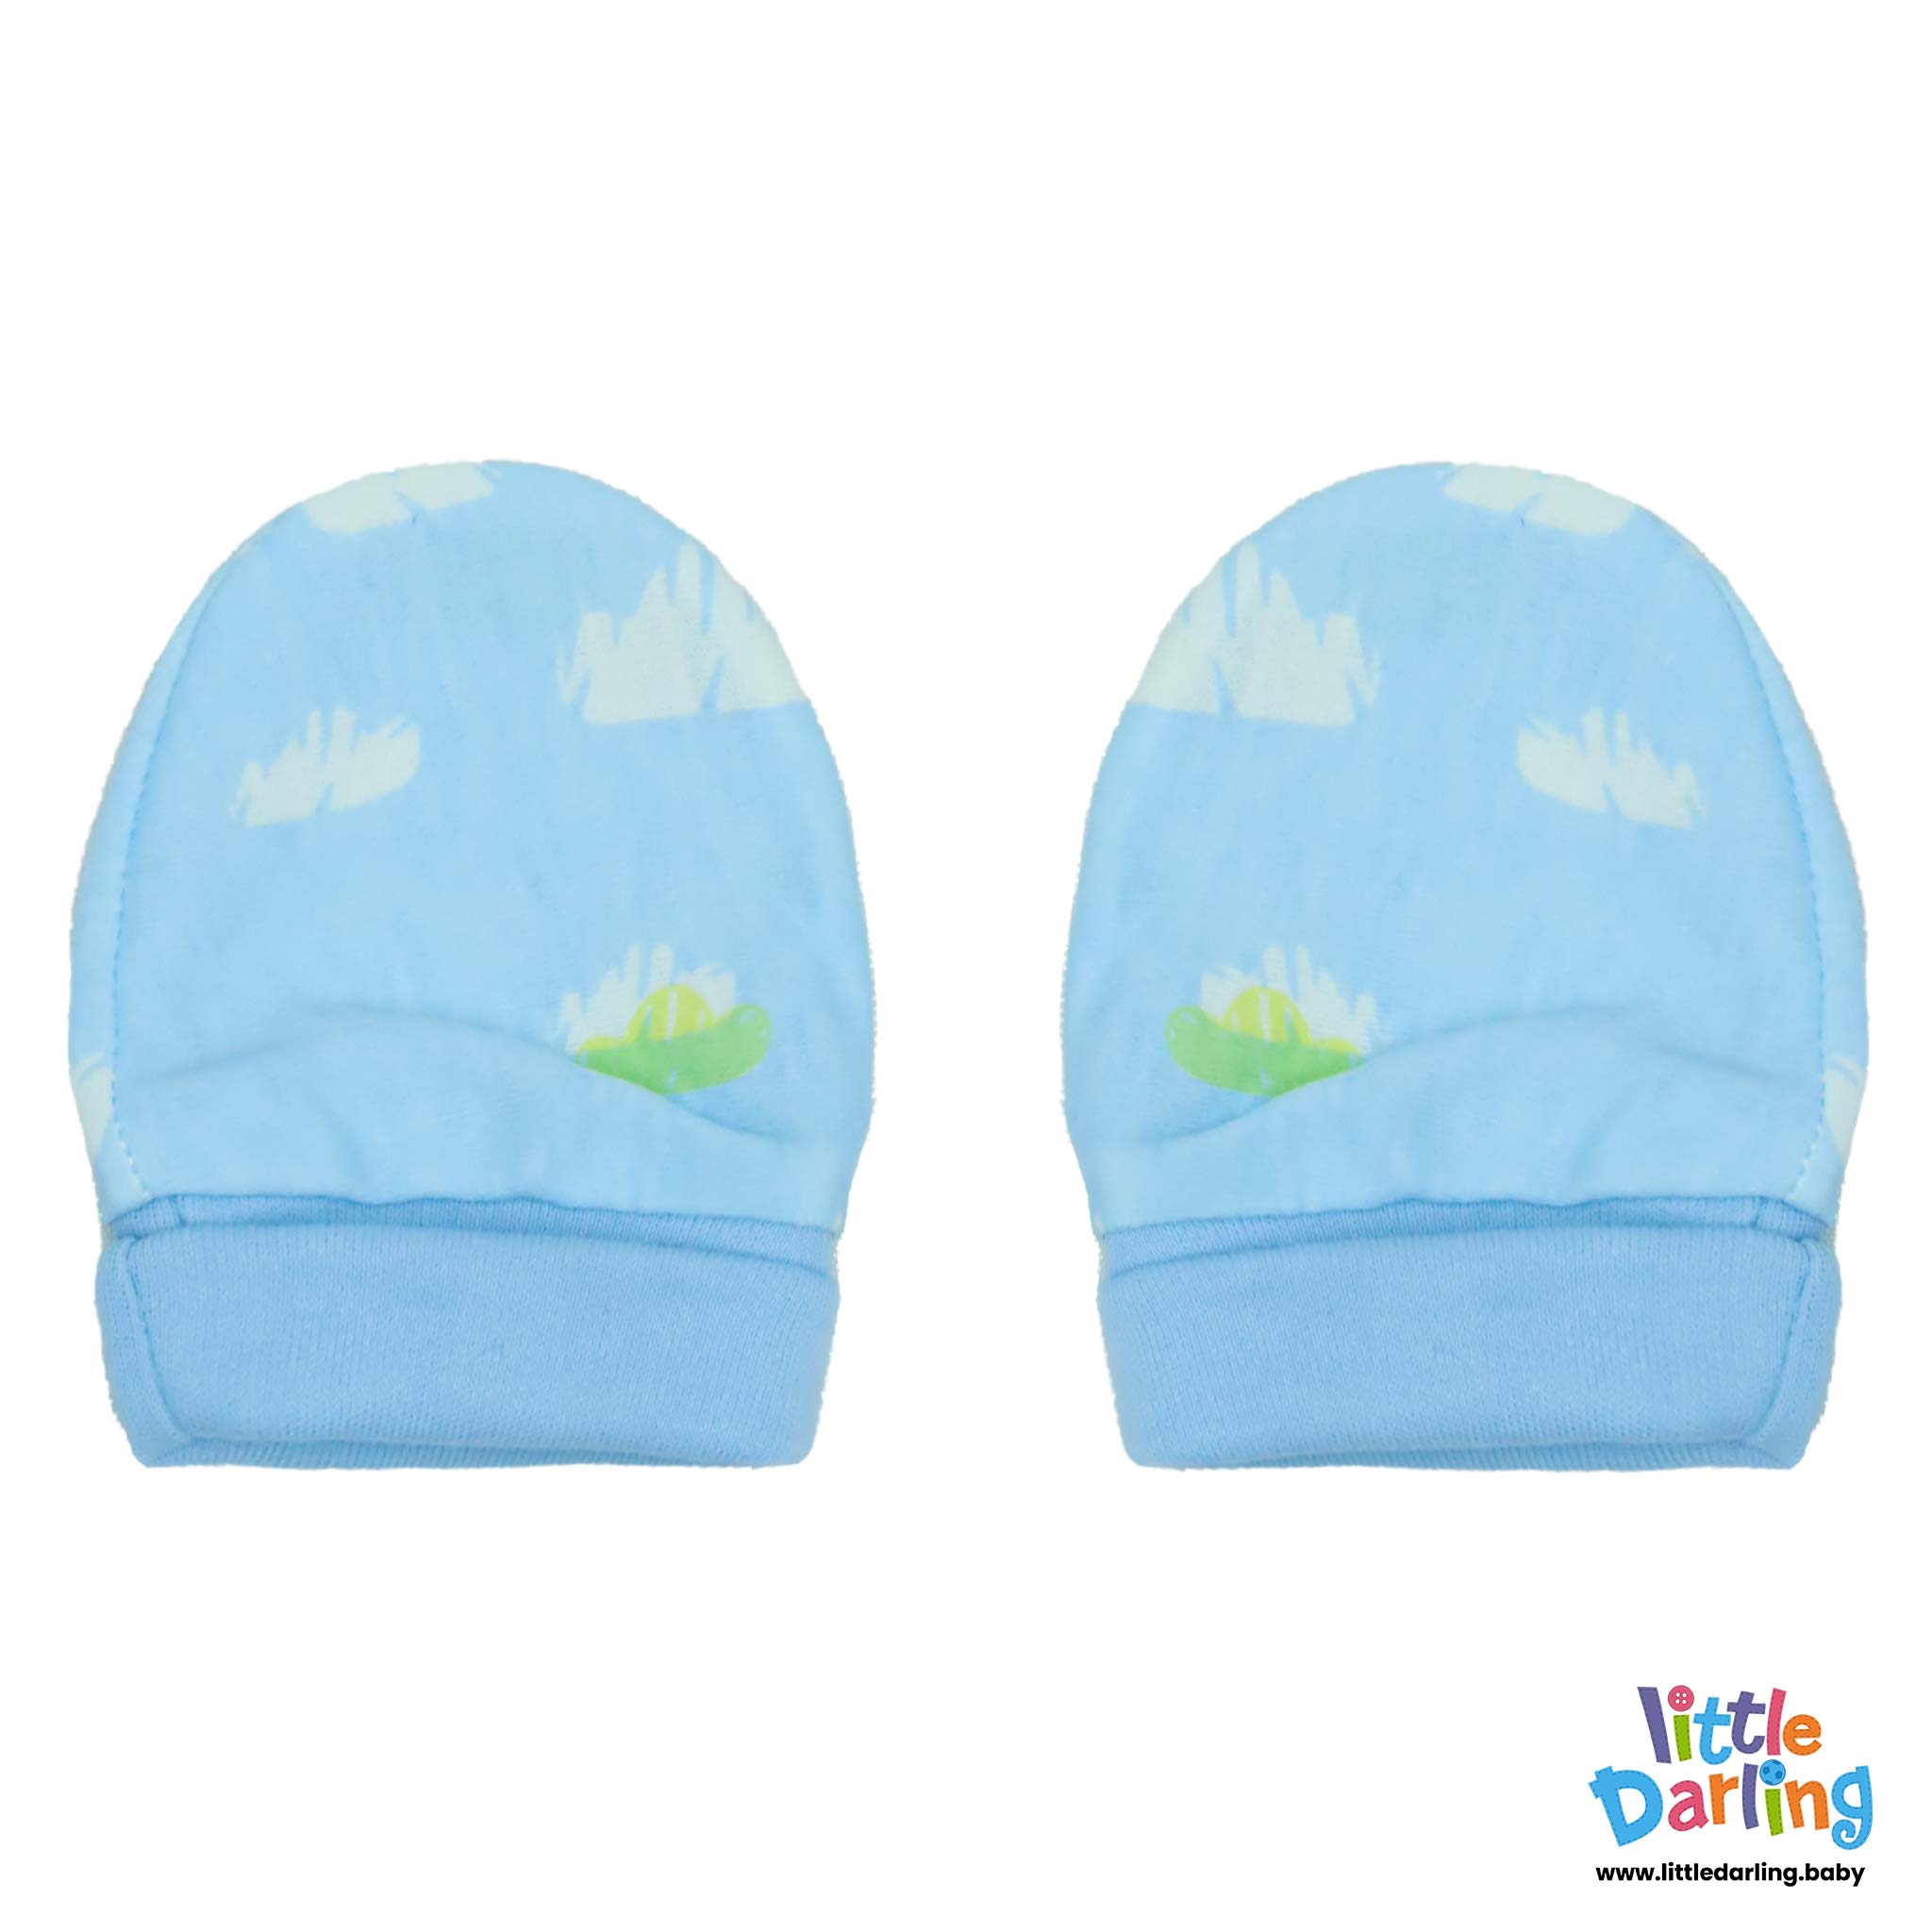 Baby Mittens Pair Pk of 2 Monkey & Cloud by Little Darling